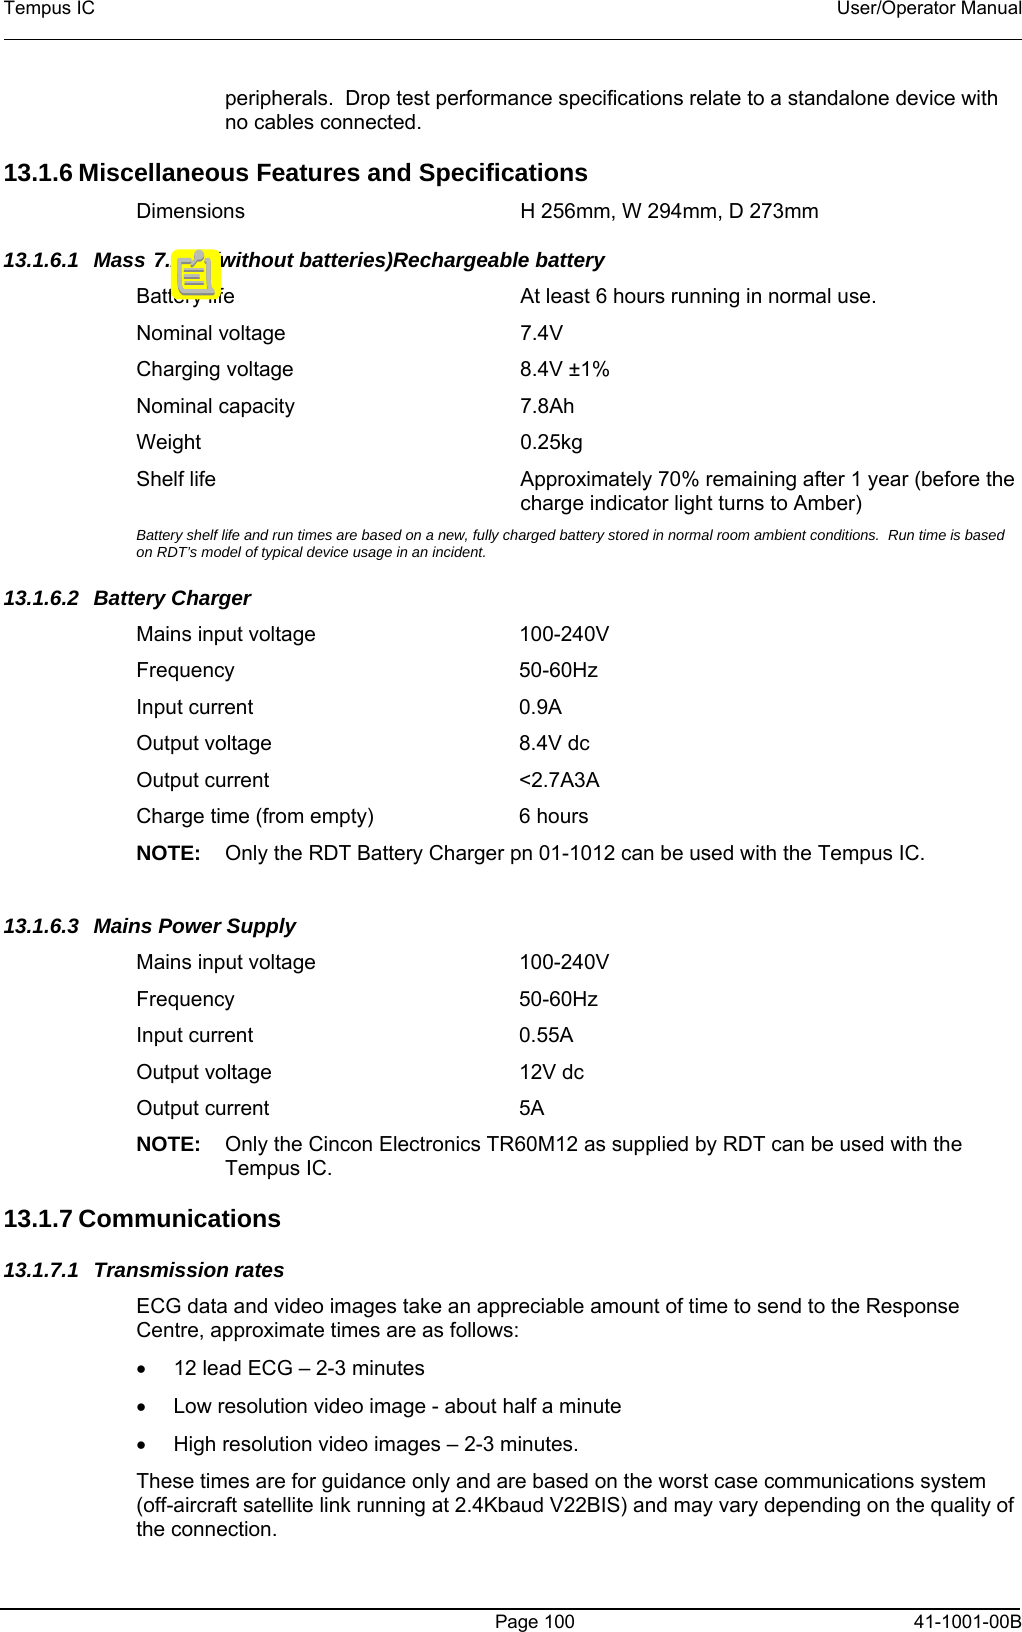 Tempus IC    User/Operator Manual     Page 100  41-1001-00B peripherals.  Drop test performance specifications relate to a standalone device with no cables connected.  13.1.6 Miscellaneous Features and Specifications Dimensions  H 256mm, W 294mm, D 273mm 13.1.6.1 Mass 7.2kg (without batteries)Rechargeable battery Battery life   At least 6 hours running in normal use. Nominal voltage   7.4V Charging voltage   8.4V ±1% Nominal capacity   7.8Ah Weight   0.25kg Shelf life  Approximately 70% remaining after 1 year (before the charge indicator light turns to Amber) Battery shelf life and run times are based on a new, fully charged battery stored in normal room ambient conditions.  Run time is based on RDT’s model of typical device usage in an incident. 13.1.6.2 Battery Charger Mains input voltage  100-240V Frequency 50-60Hz Input current  0.9A Output voltage  8.4V dc Output current  &lt;2.7A3A Charge time (from empty)   6 hours NOTE:  Only the RDT Battery Charger pn 01-1012 can be used with the Tempus IC.  13.1.6.3  Mains Power Supply Mains input voltage  100-240V Frequency 50-60Hz Input current  0.55A Output voltage  12V dc Output current  5A NOTE:  Only the Cincon Electronics TR60M12 as supplied by RDT can be used with the Tempus IC.  13.1.7 Communications  13.1.7.1 Transmission rates ECG data and video images take an appreciable amount of time to send to the Response Centre, approximate times are as follows: •  12 lead ECG – 2-3 minutes •  Low resolution video image - about half a minute •  High resolution video images – 2-3 minutes. These times are for guidance only and are based on the worst case communications system (off-aircraft satellite link running at 2.4Kbaud V22BIS) and may vary depending on the quality of the connection. 